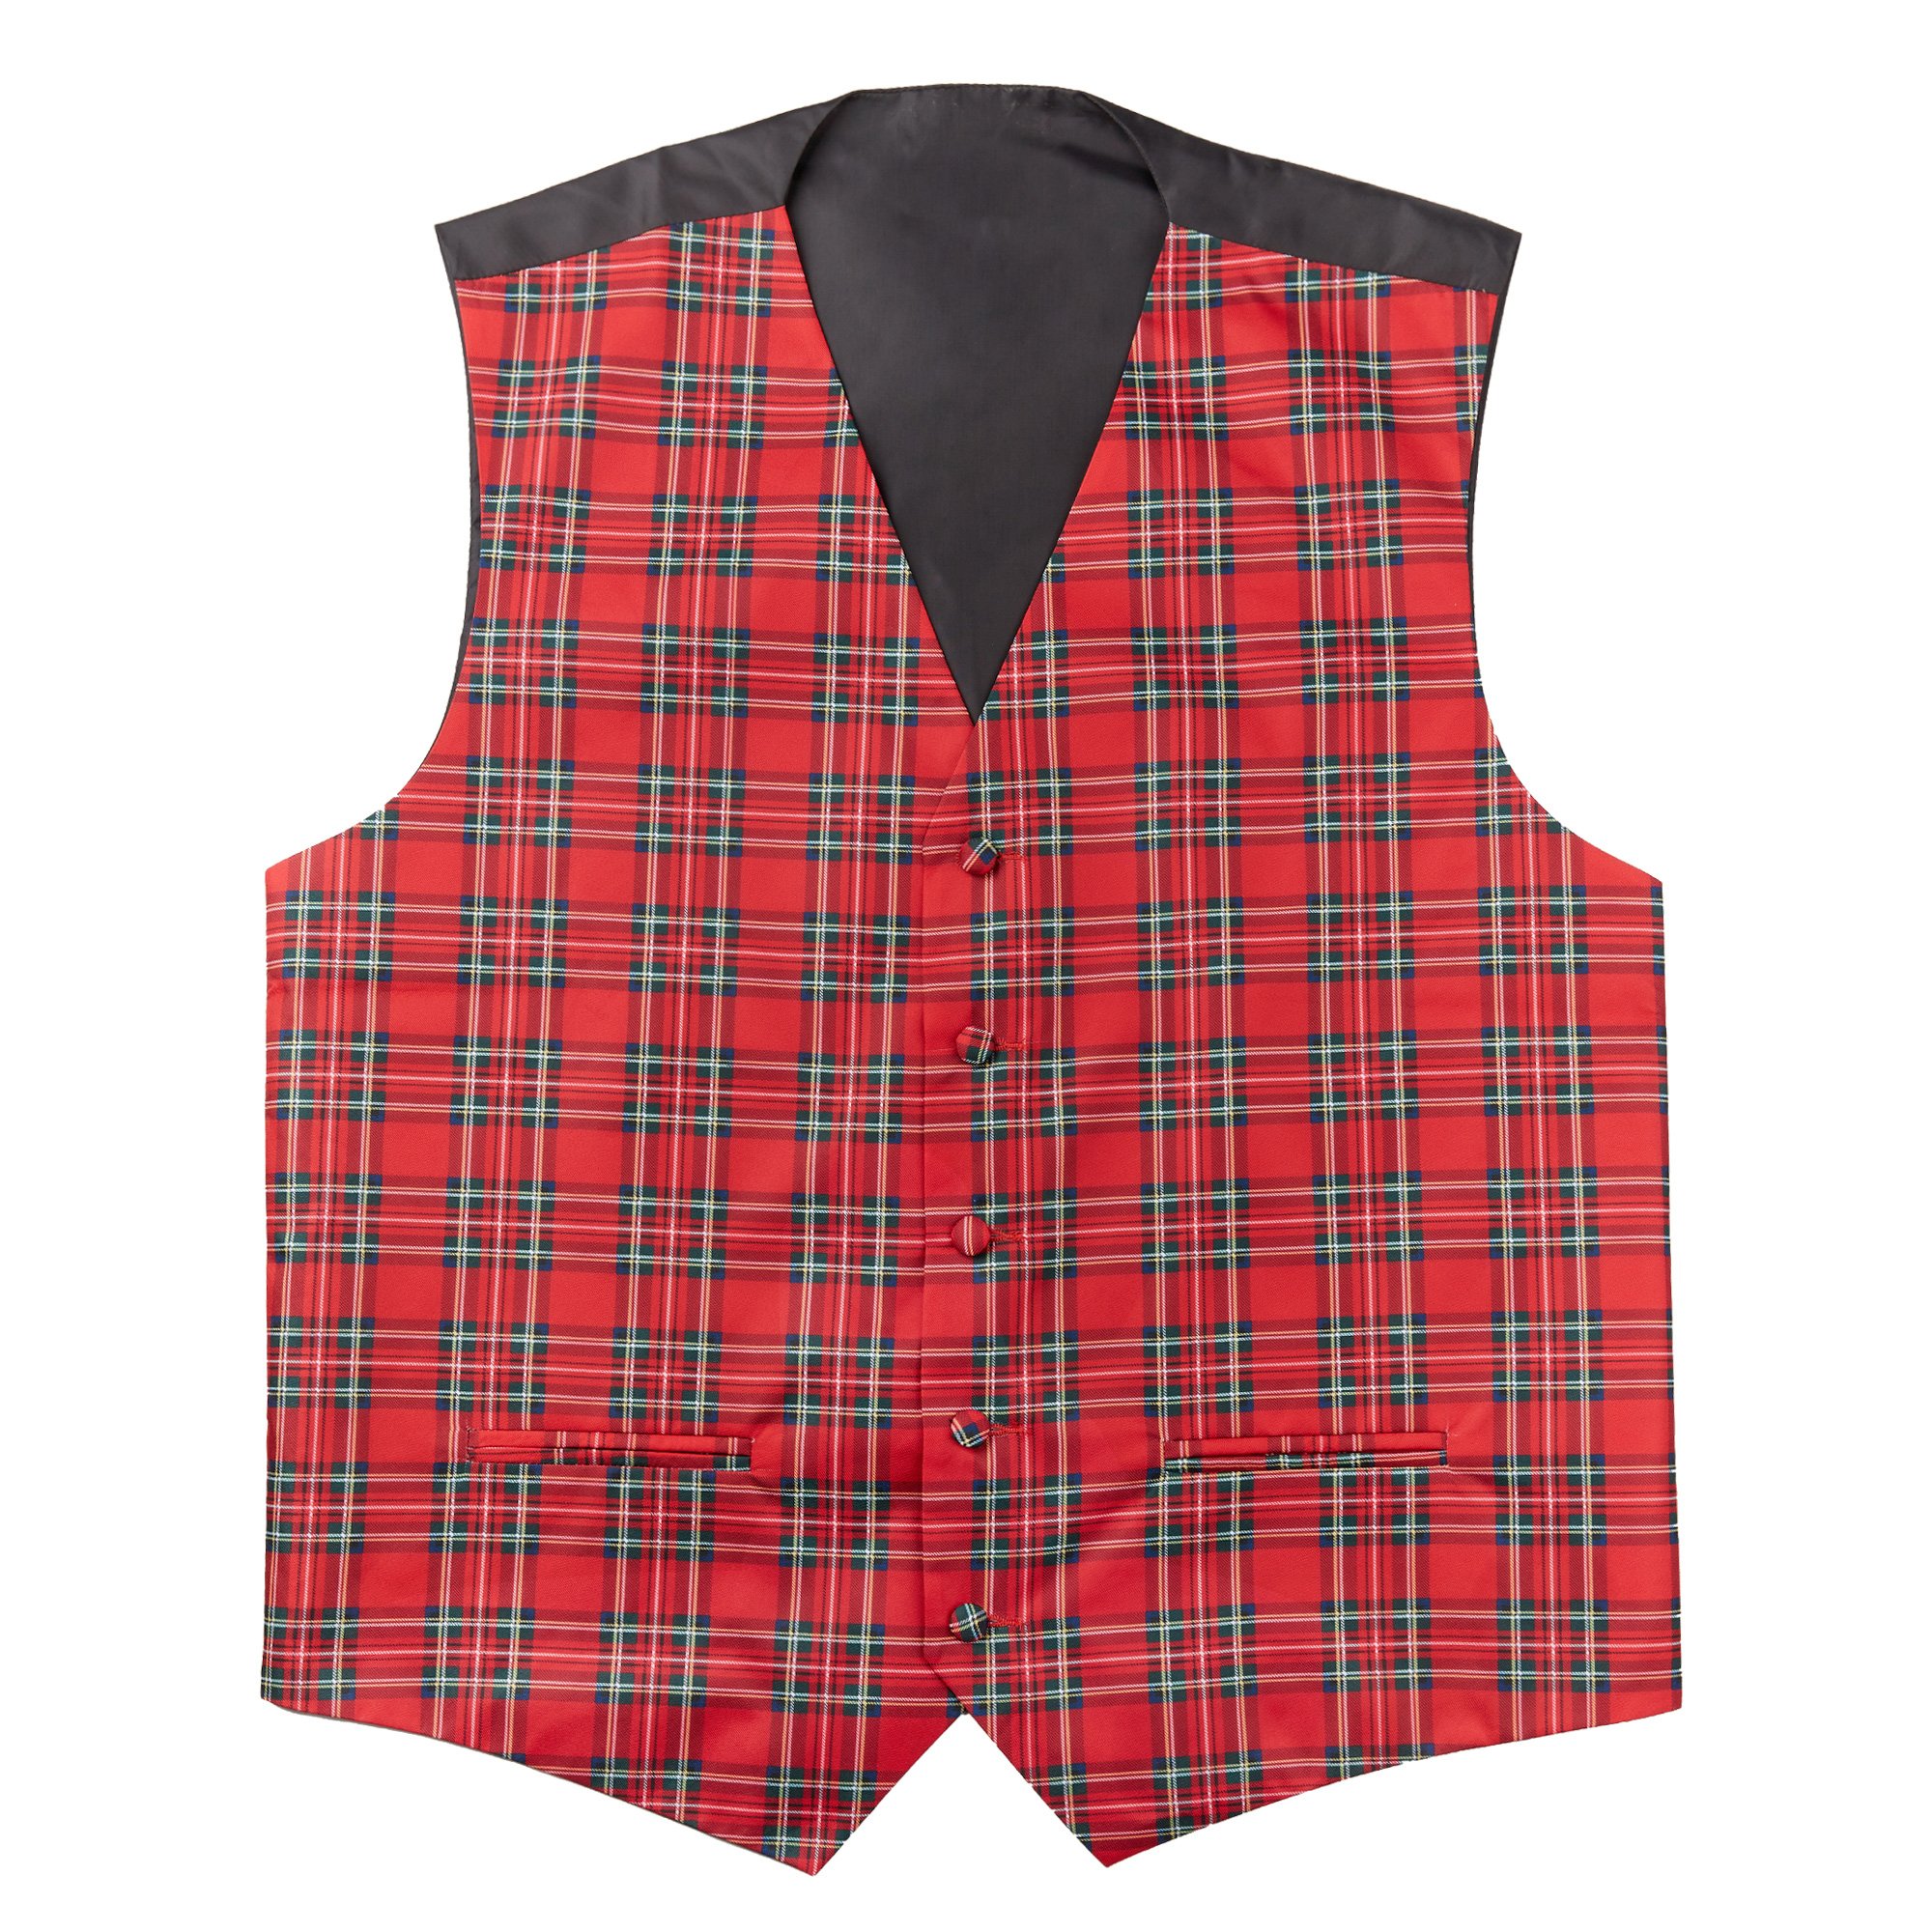 Jacob Alexander Merry Christmas Royal Stewart Red Plaid Men's Vest Clip-On Neck Tie and Adult Face Mask Set - 2XL - image 2 of 8